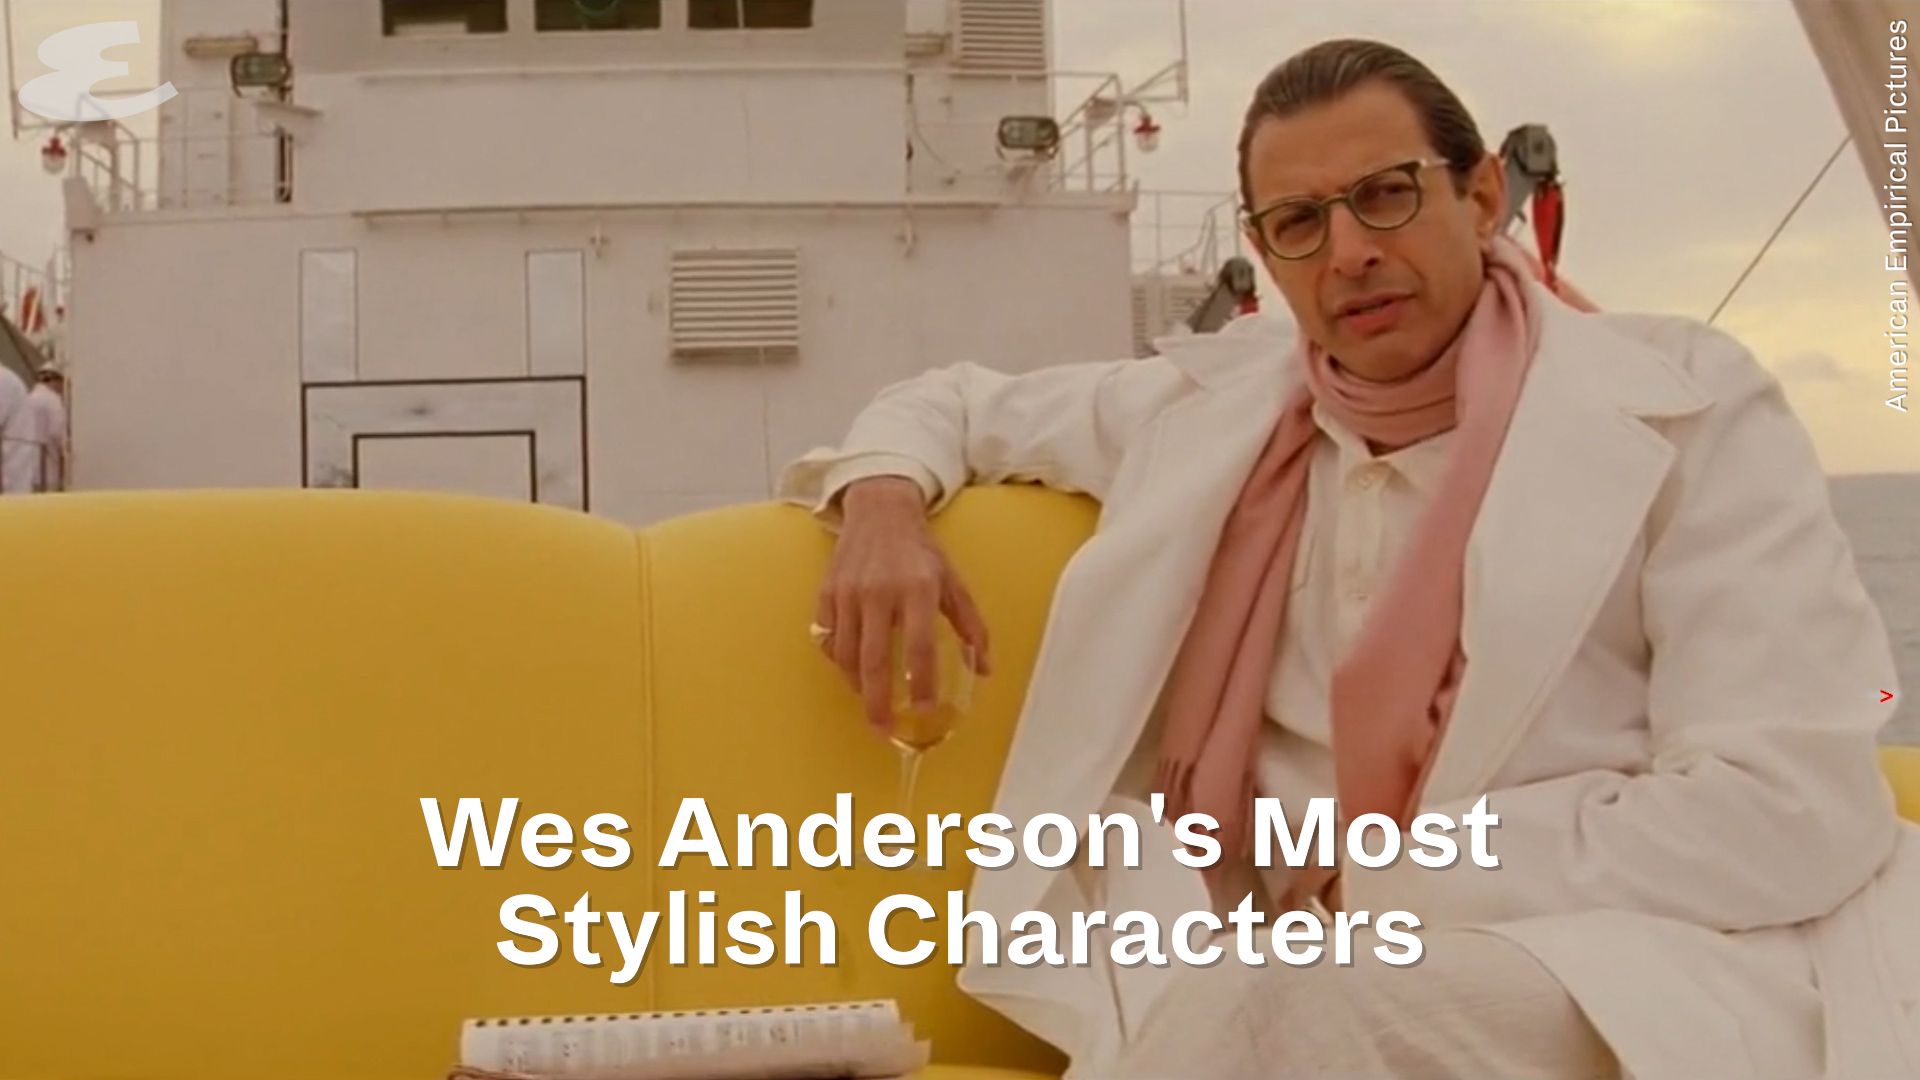 All 9 Wes Anderson movies, ranked from worst to best